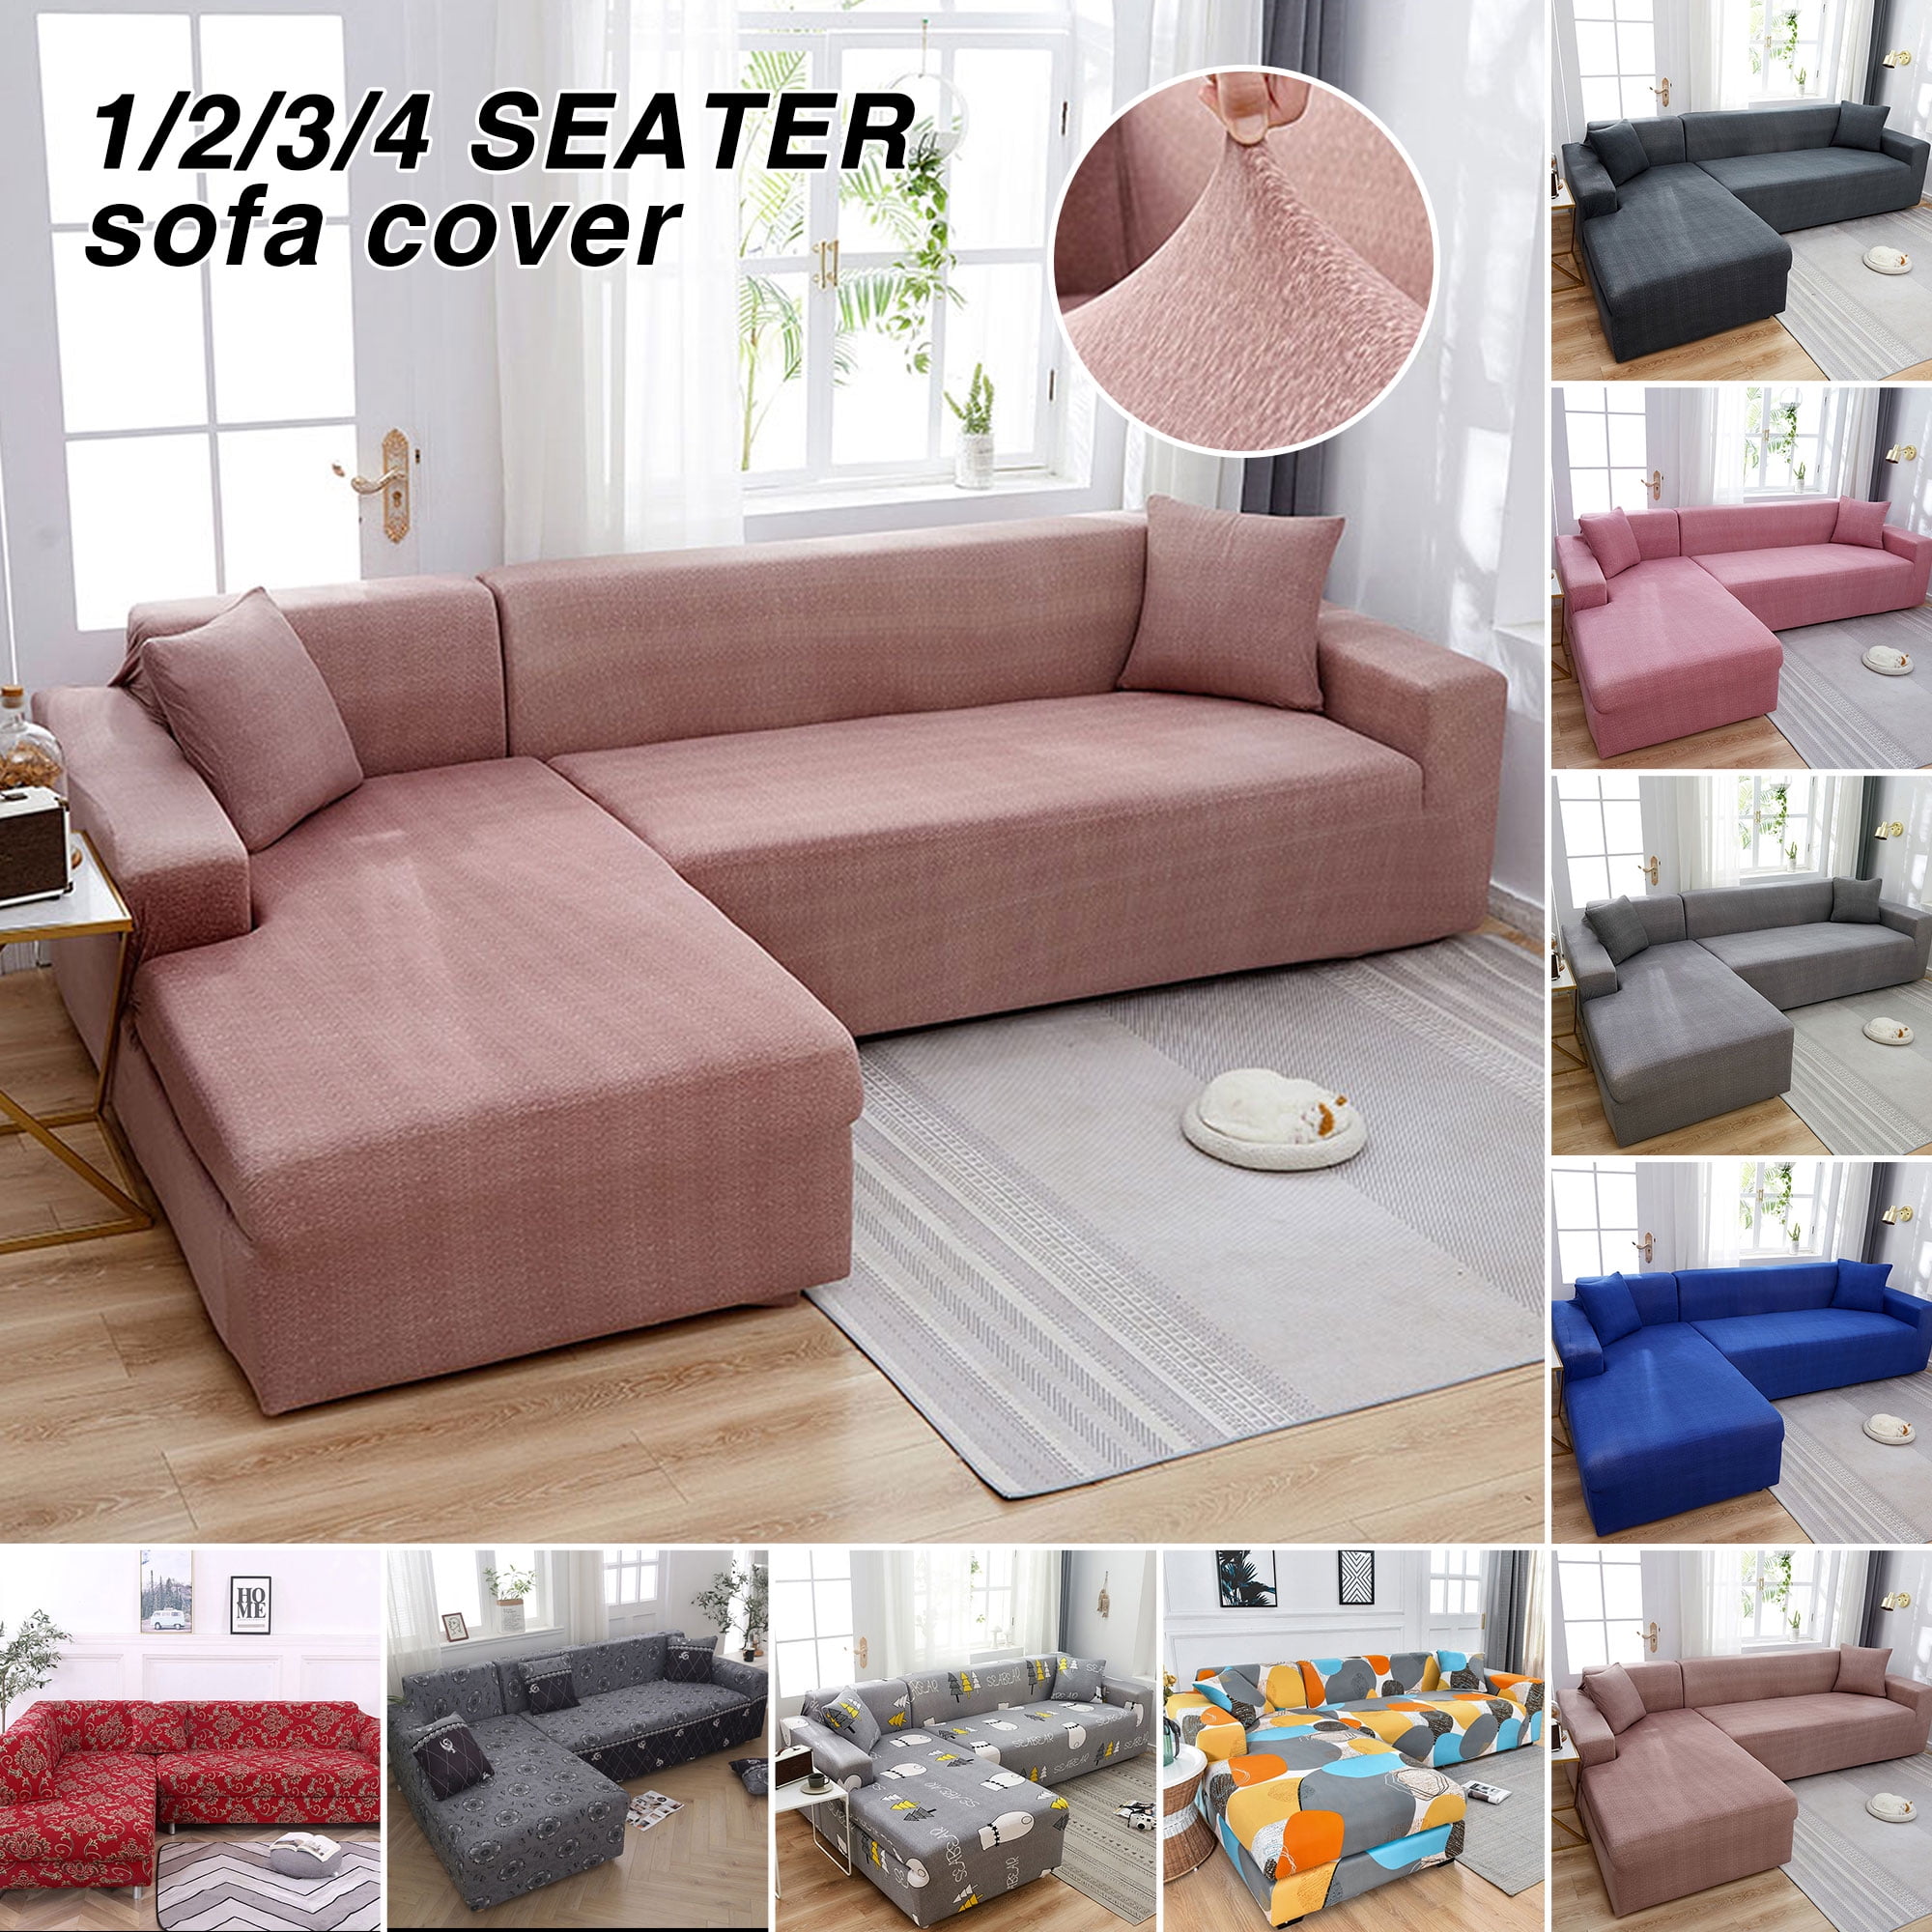 Details about   1 2 3 4 Seater Stretch Sofa Cover Corner Couch Slipcovers Furniture Protector 